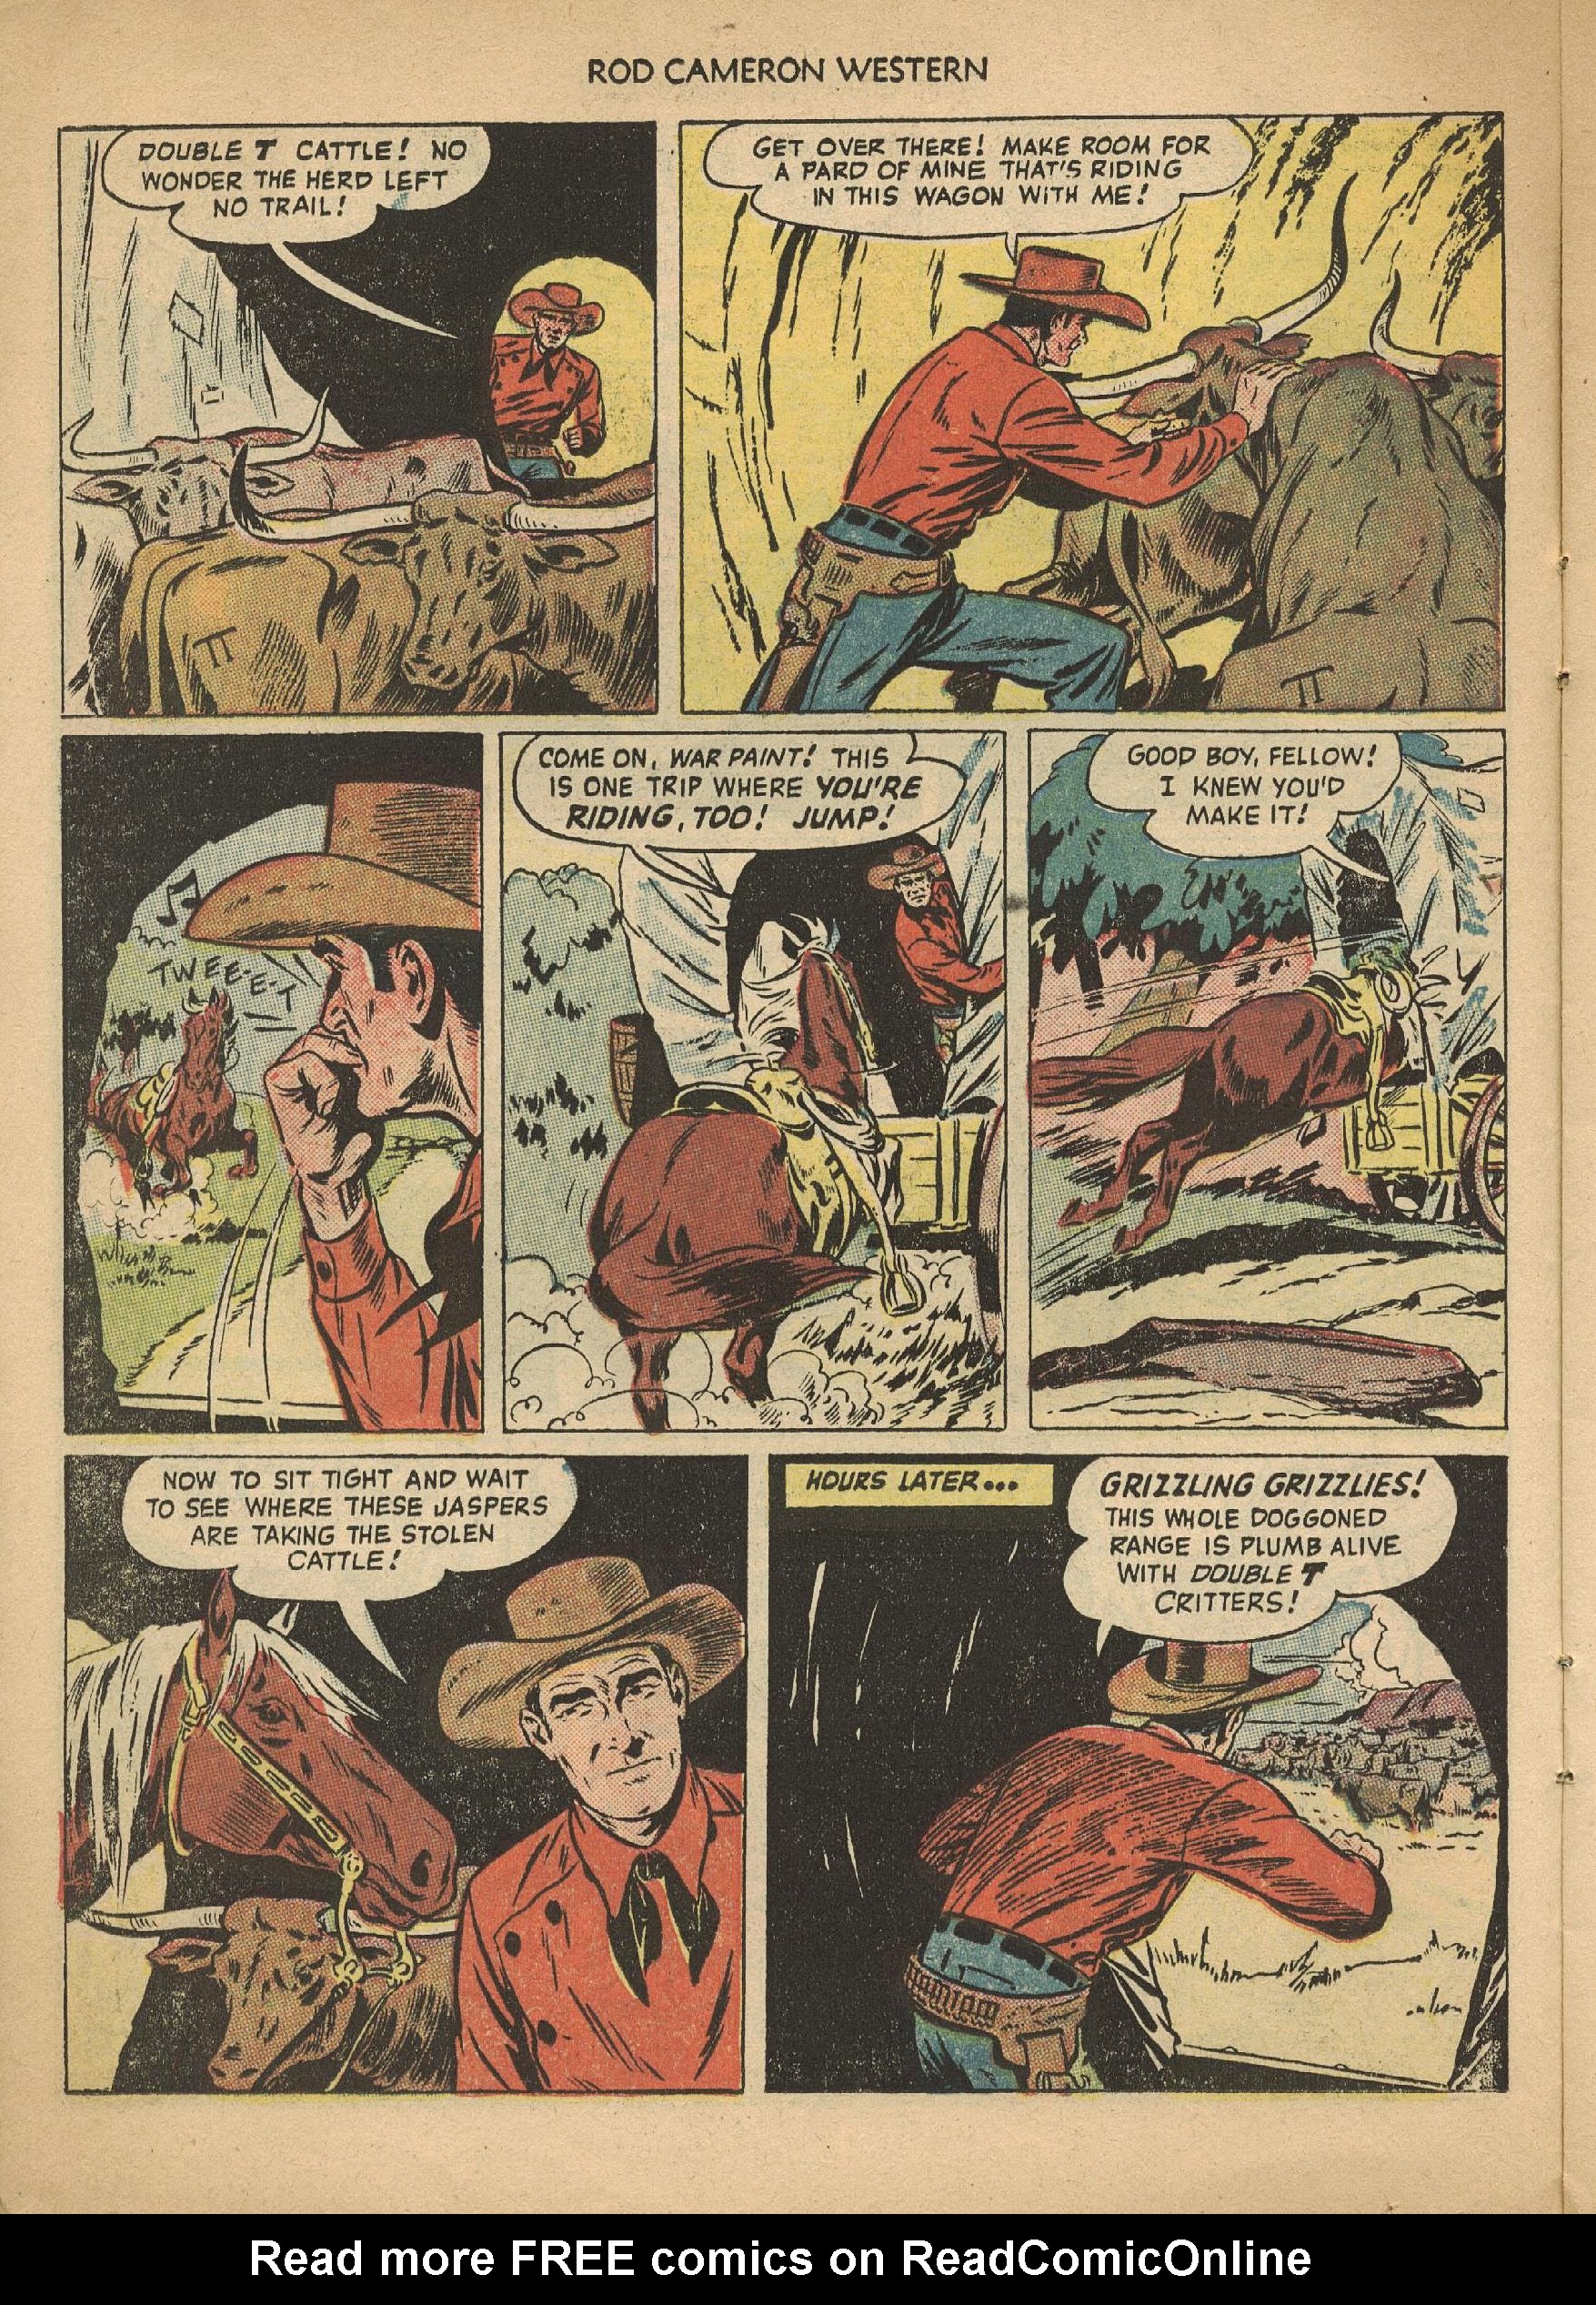 Read online Rod Cameron Western comic -  Issue #1 - 14